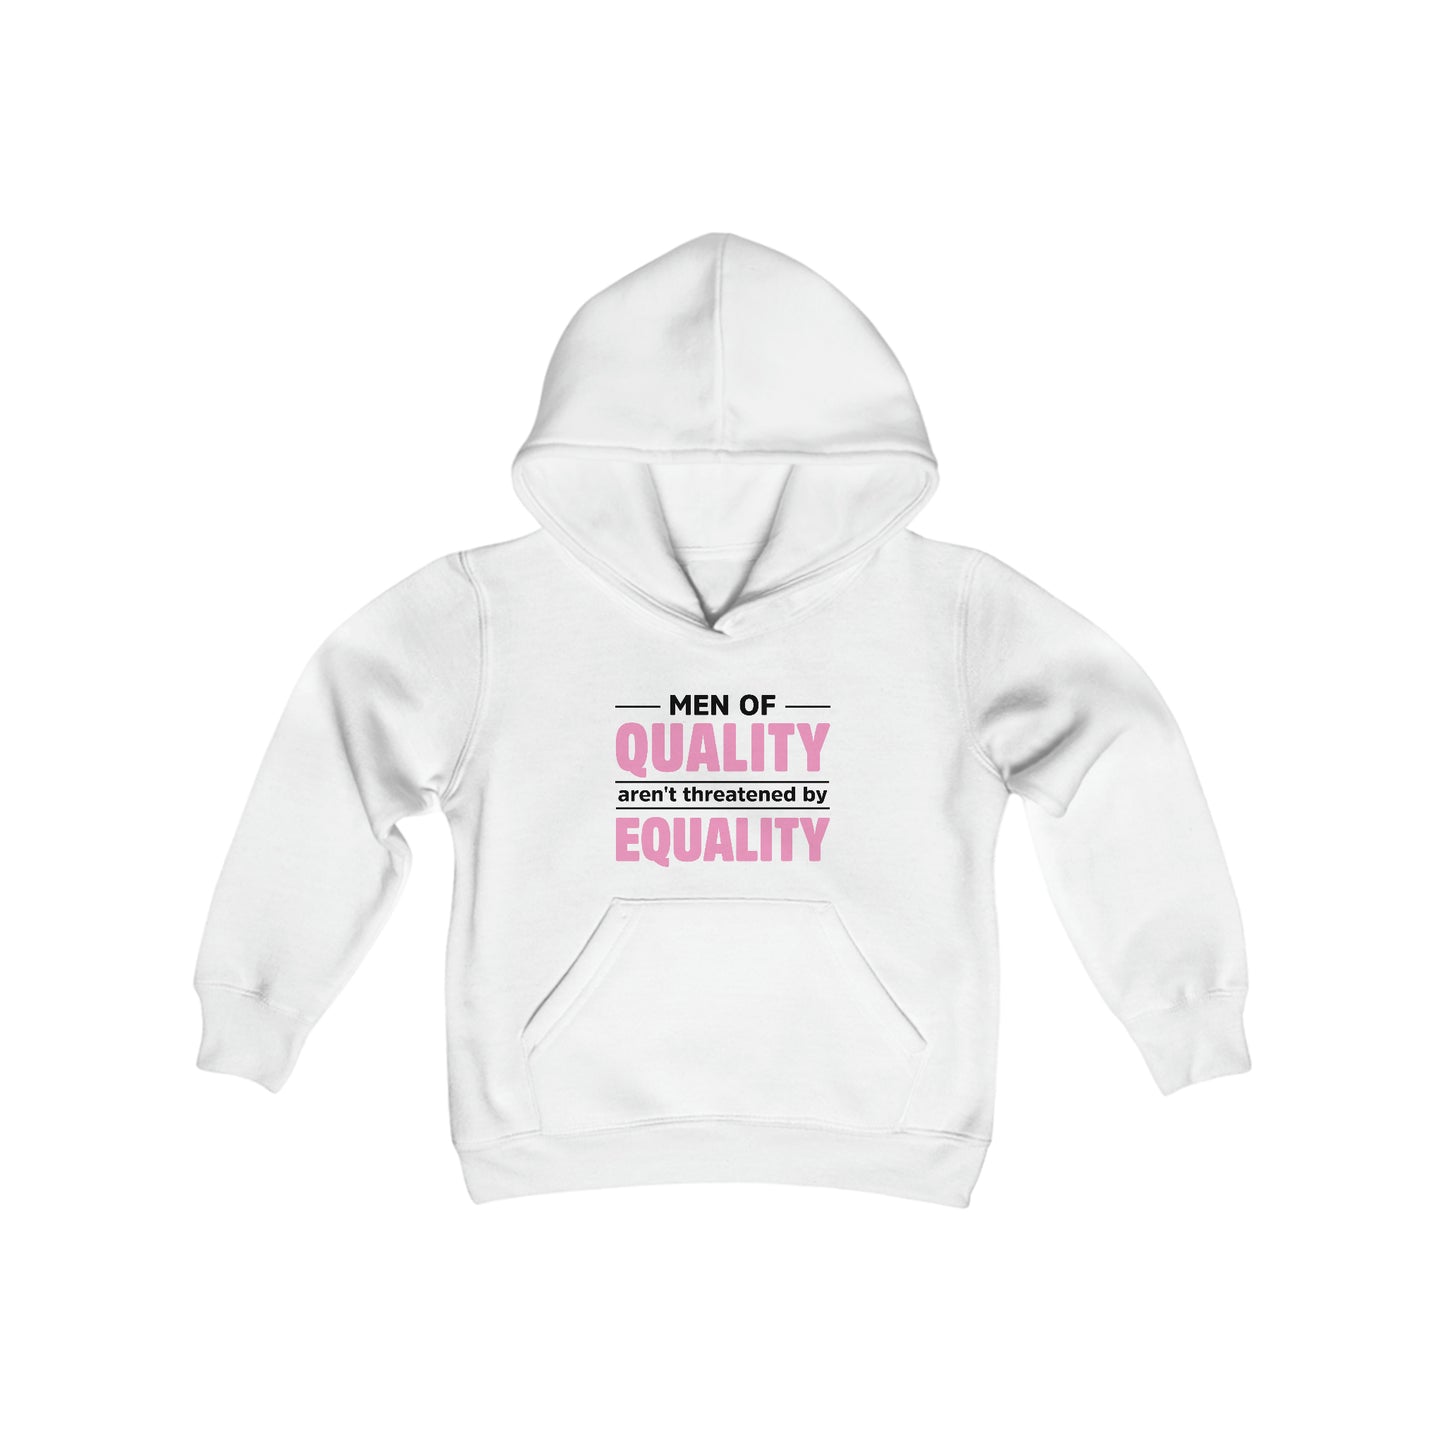 “Men of Quality” Youth Hoodie